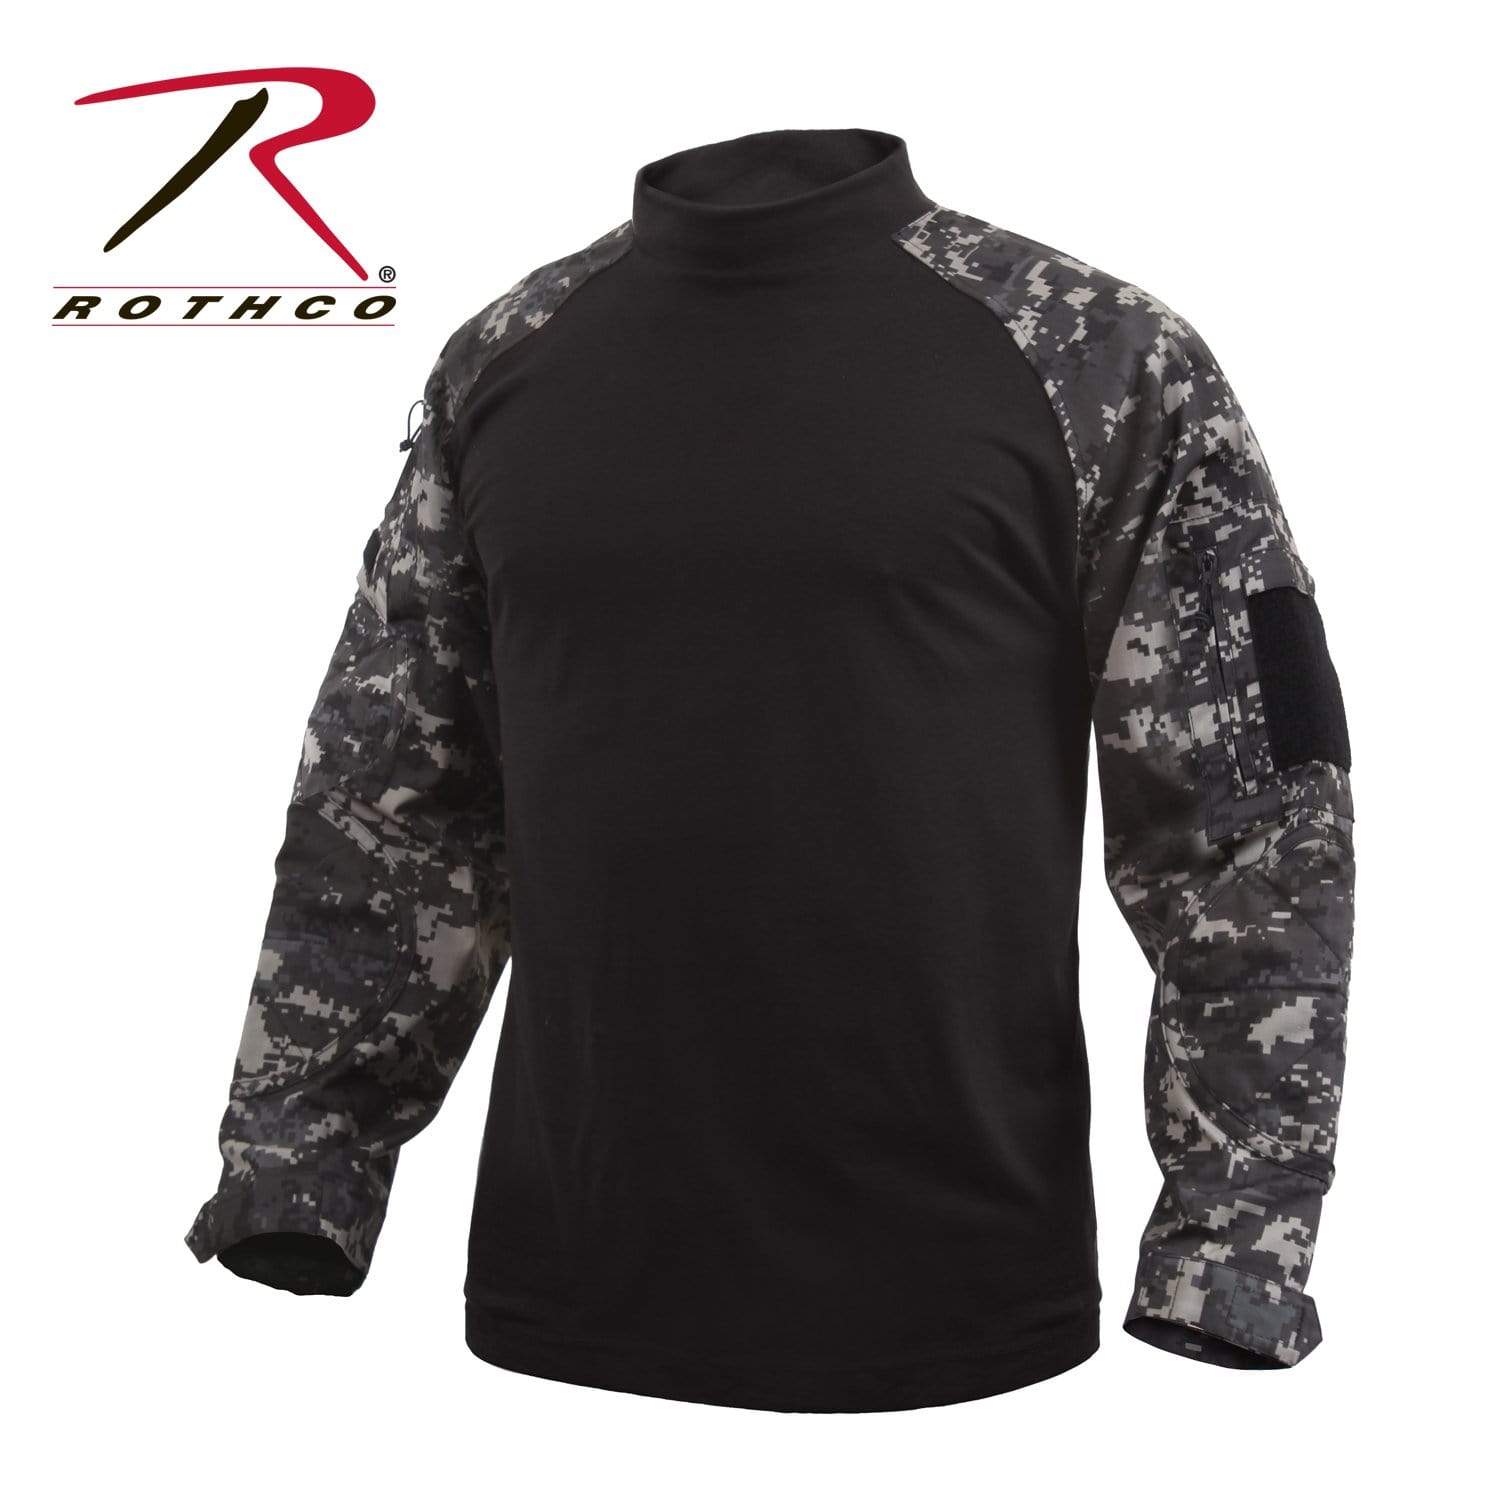 Rothco Military Combat Shirt- Subdued Urban Digital Camo - Eminent Paintball And Airsoft